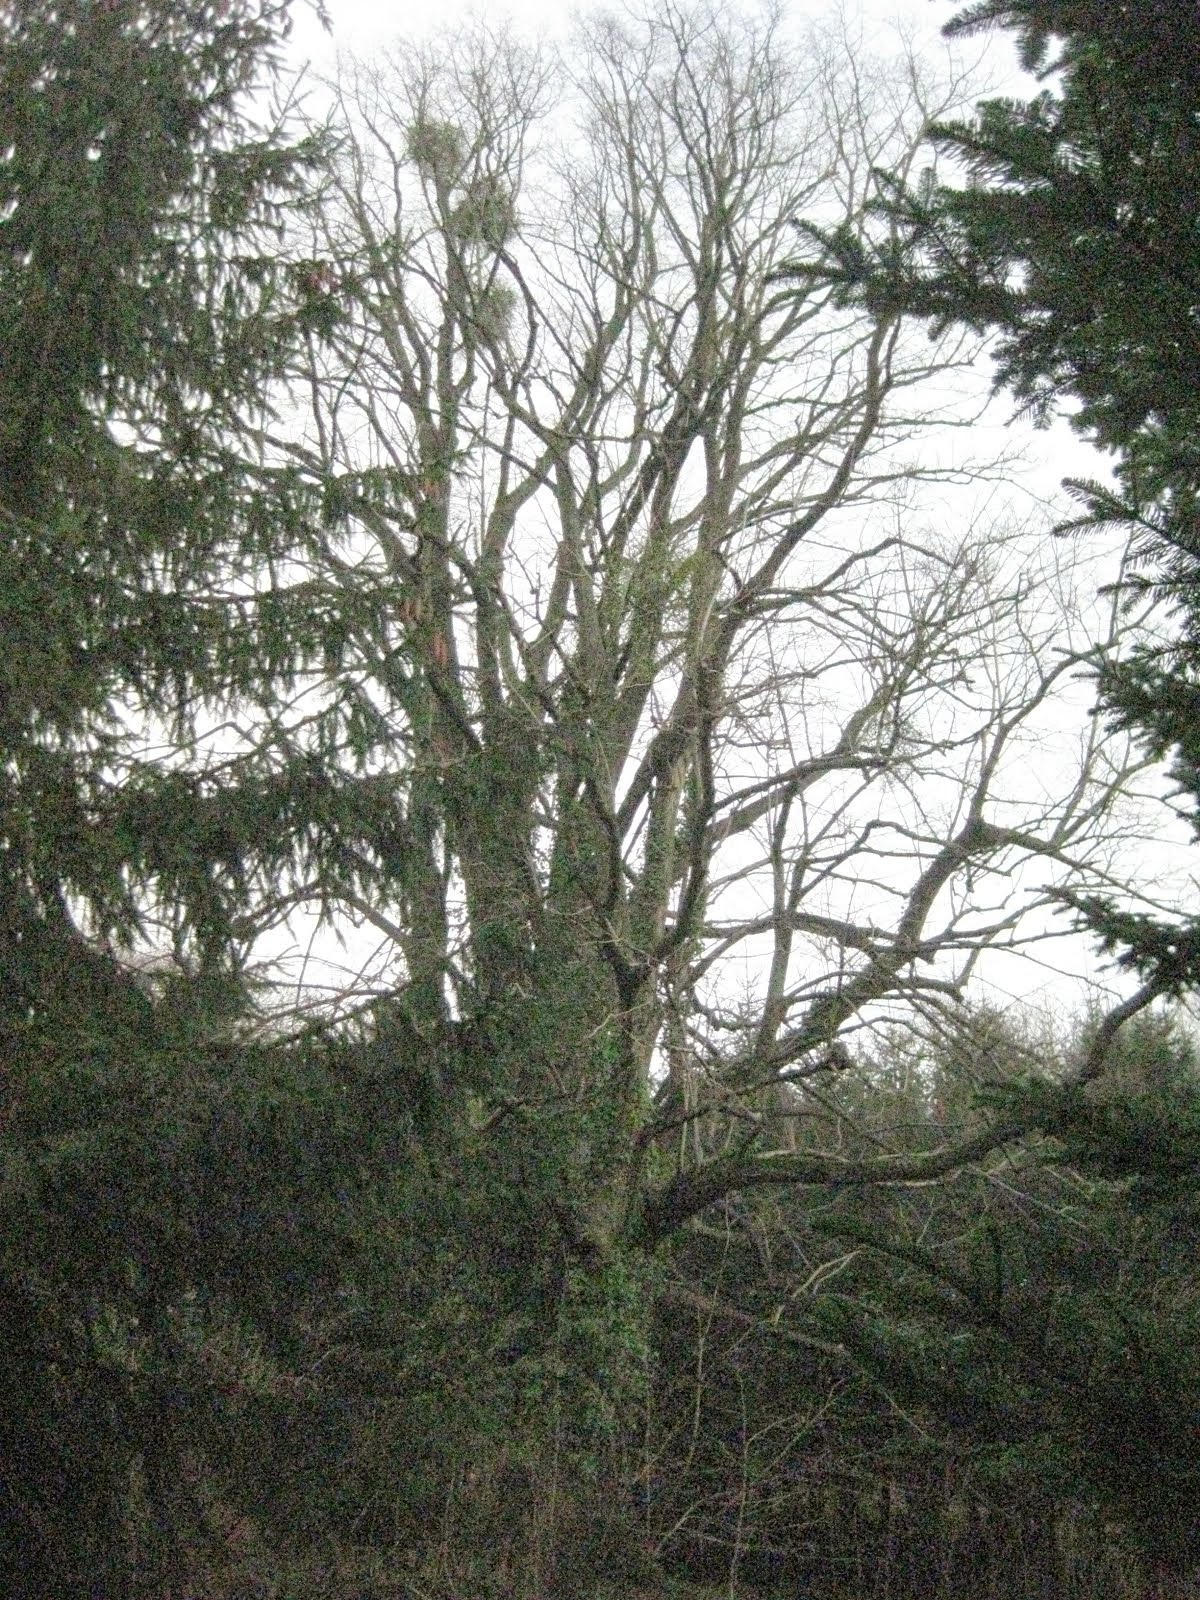 The towering lime tree, with its mistletoe